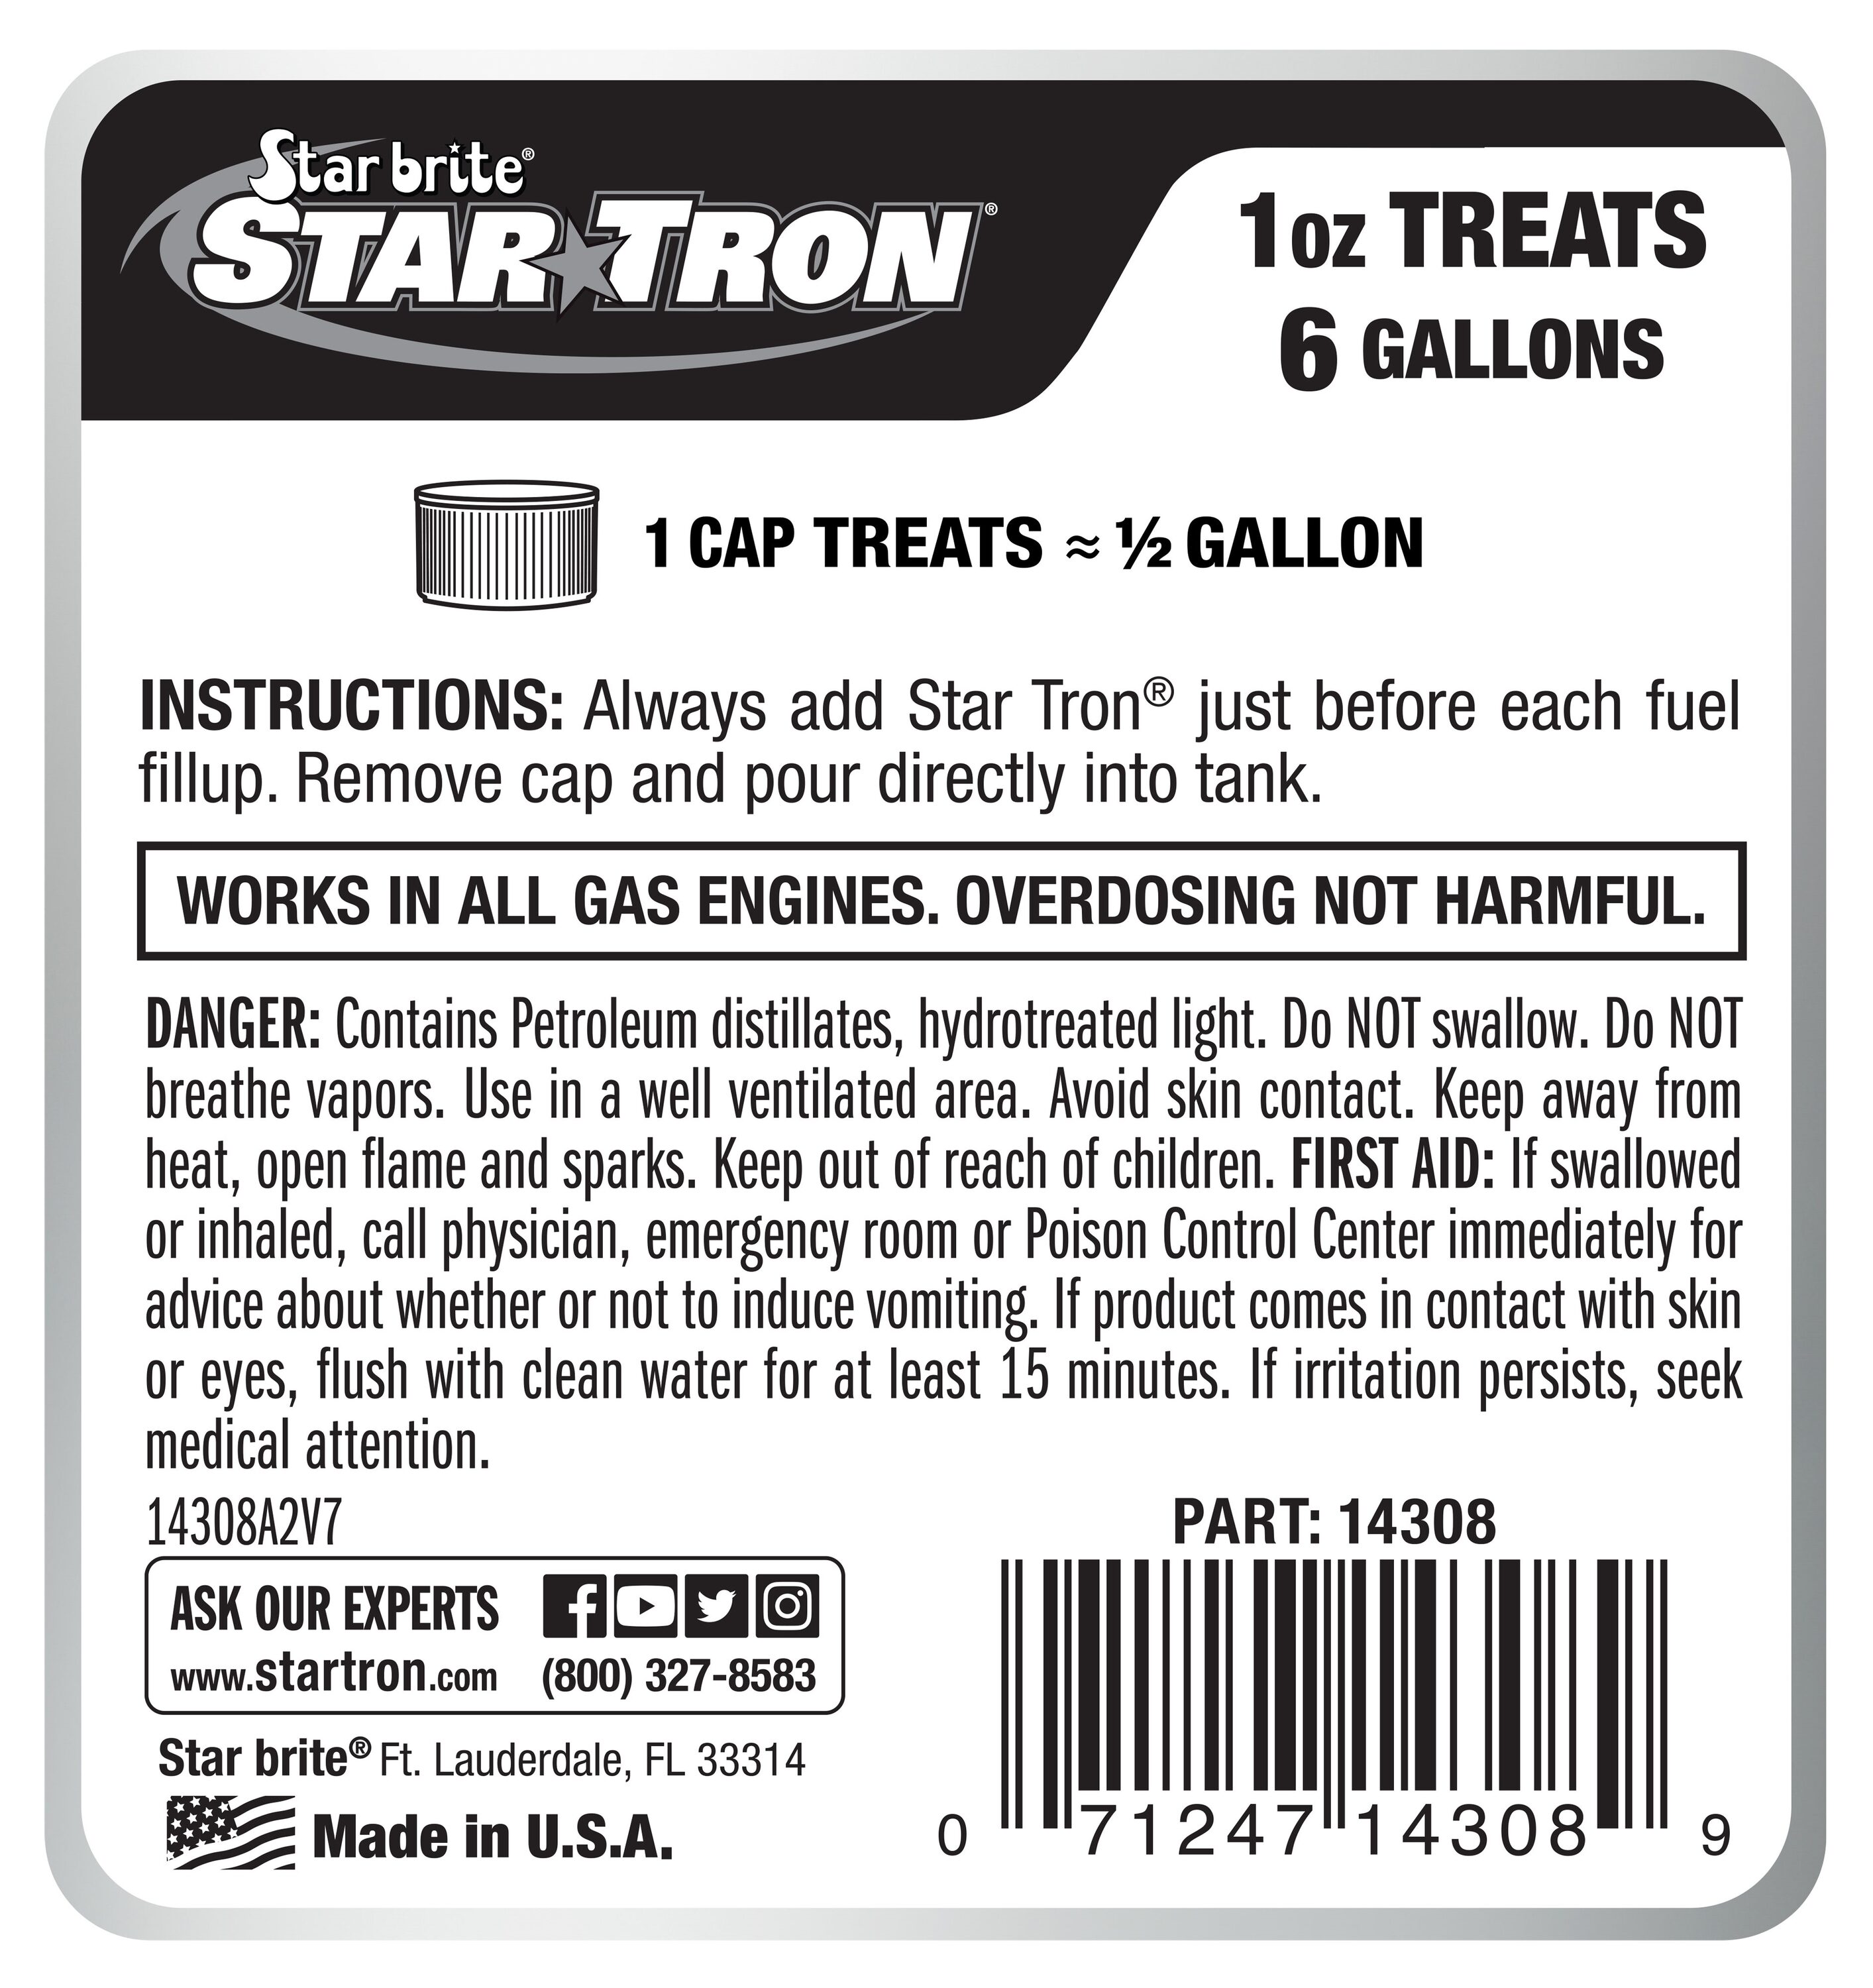 STAR TRON 8 oz. 2-cycle or 4-cycle Engines Fuel Additive